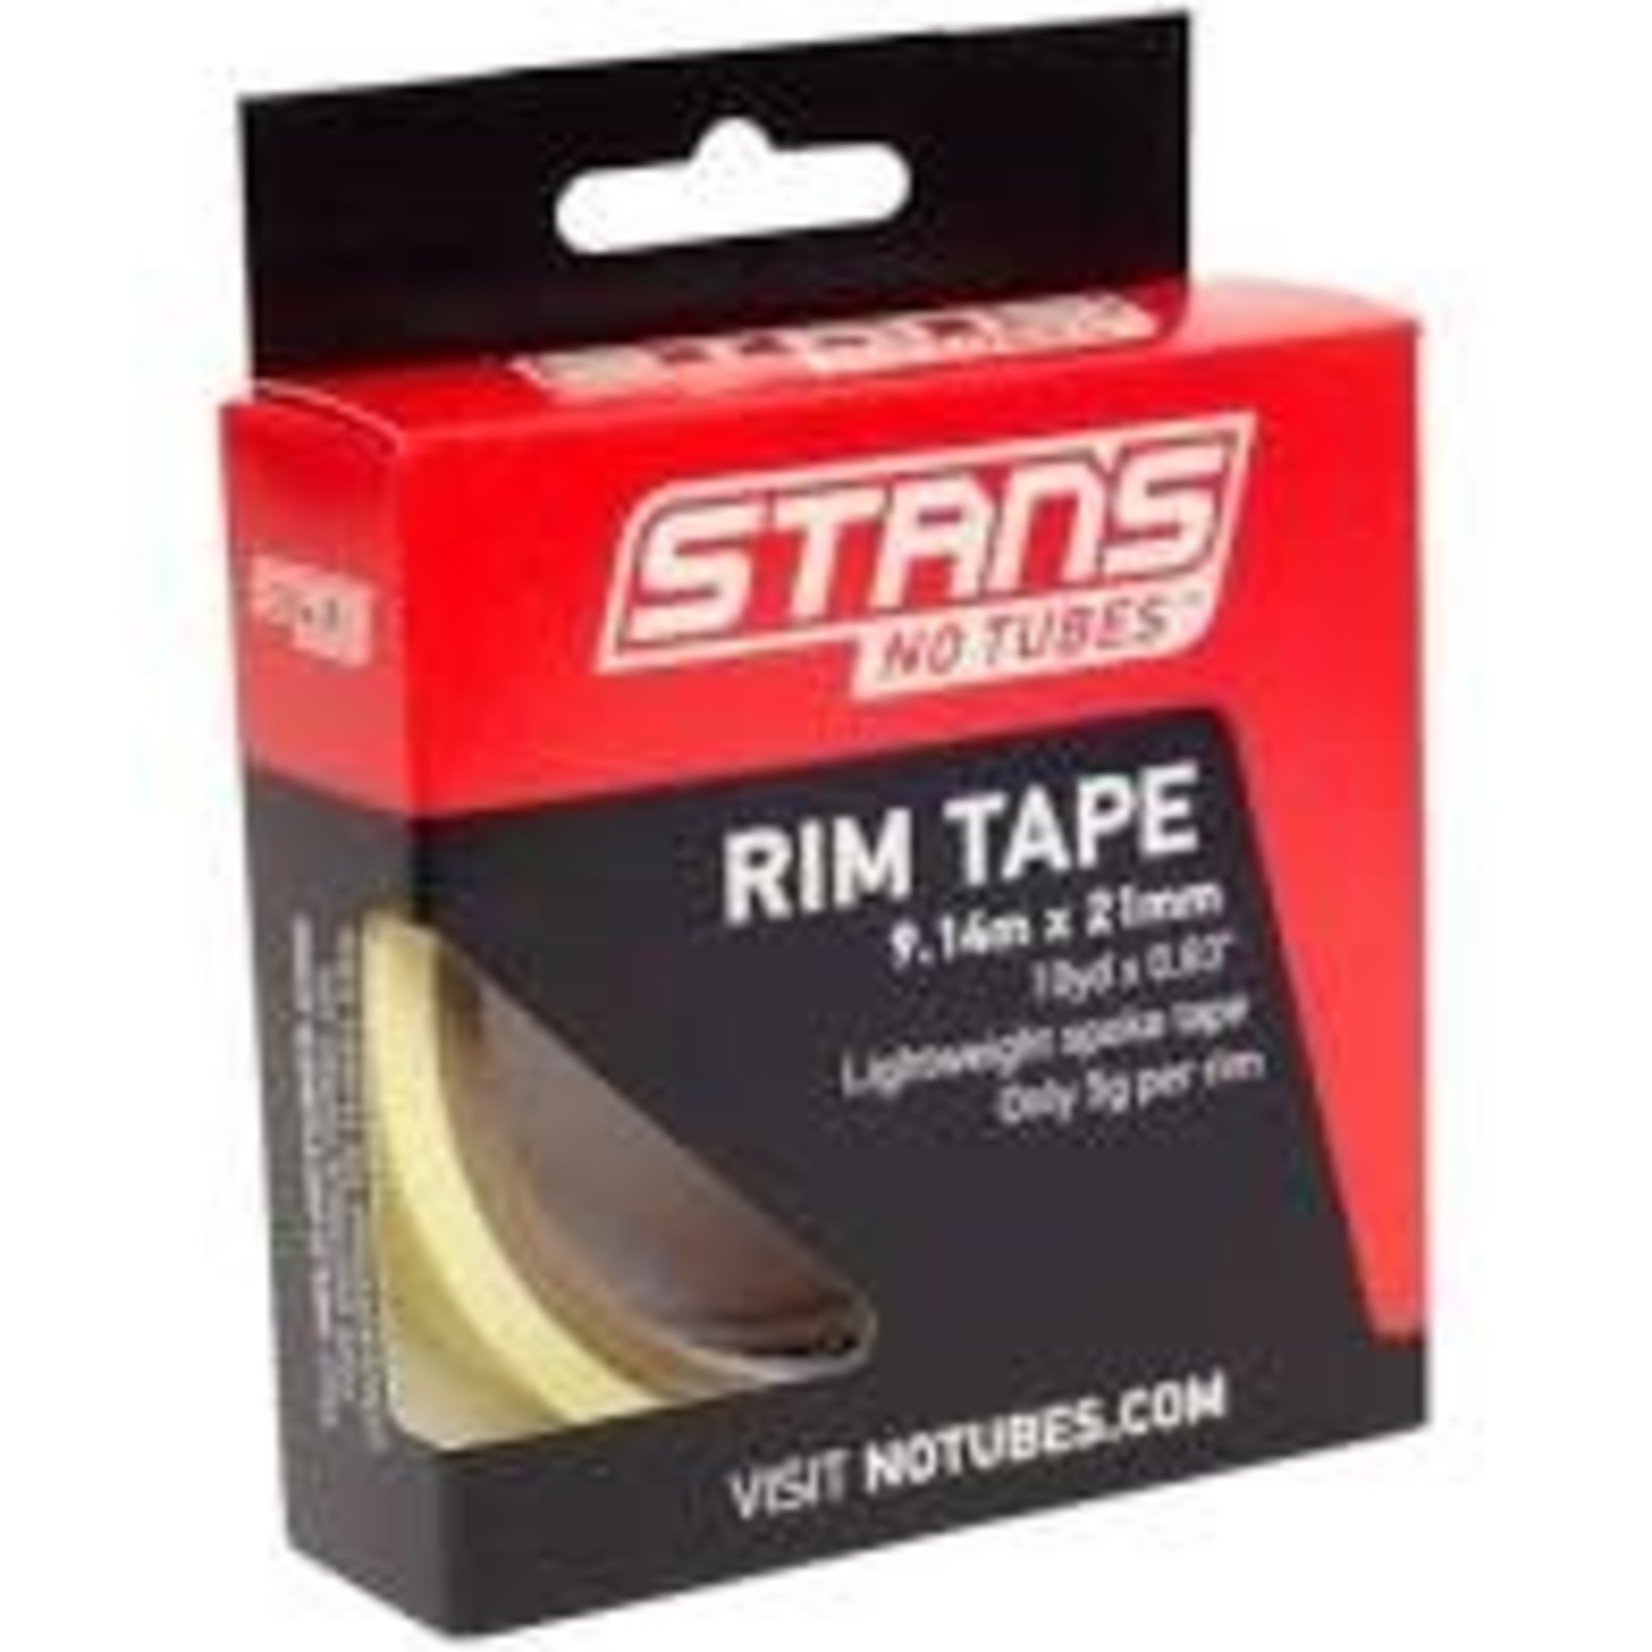 Stan's No Tubes Stan's No Tubes Yellow Rim Tape 10 Yards 21mm Wide